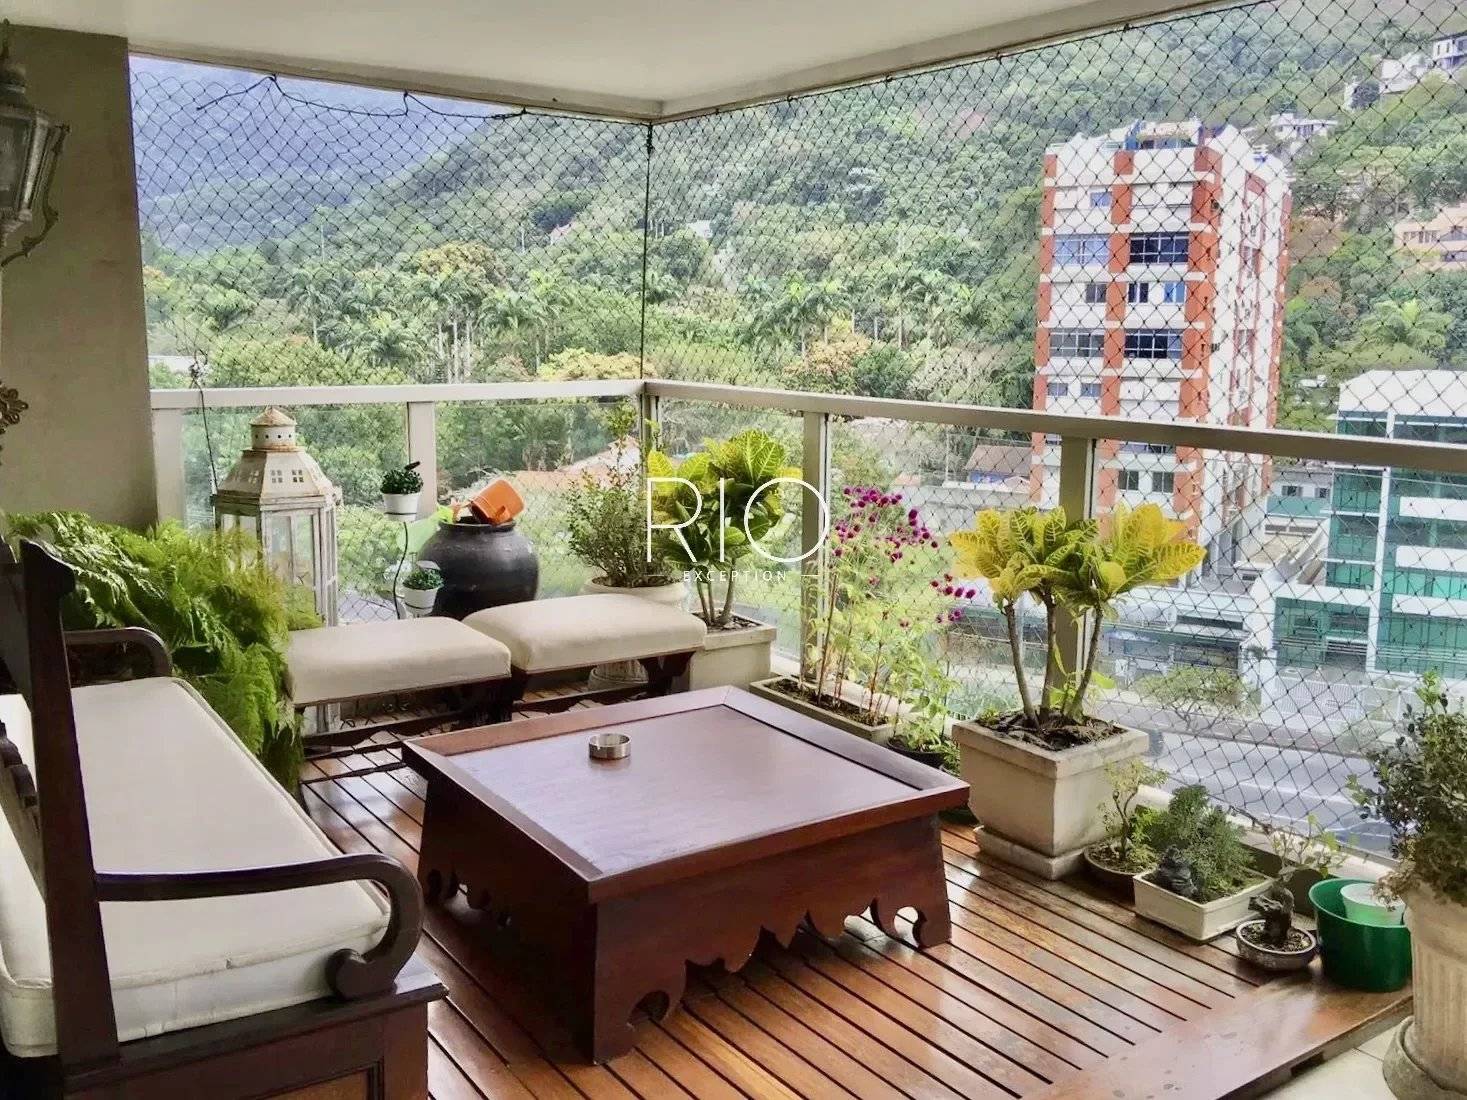 SÃO CONRADO - Beautiful apartment with large balcony and view - 5 bedrooms - in condominium with all equipment for sport and relaxation.